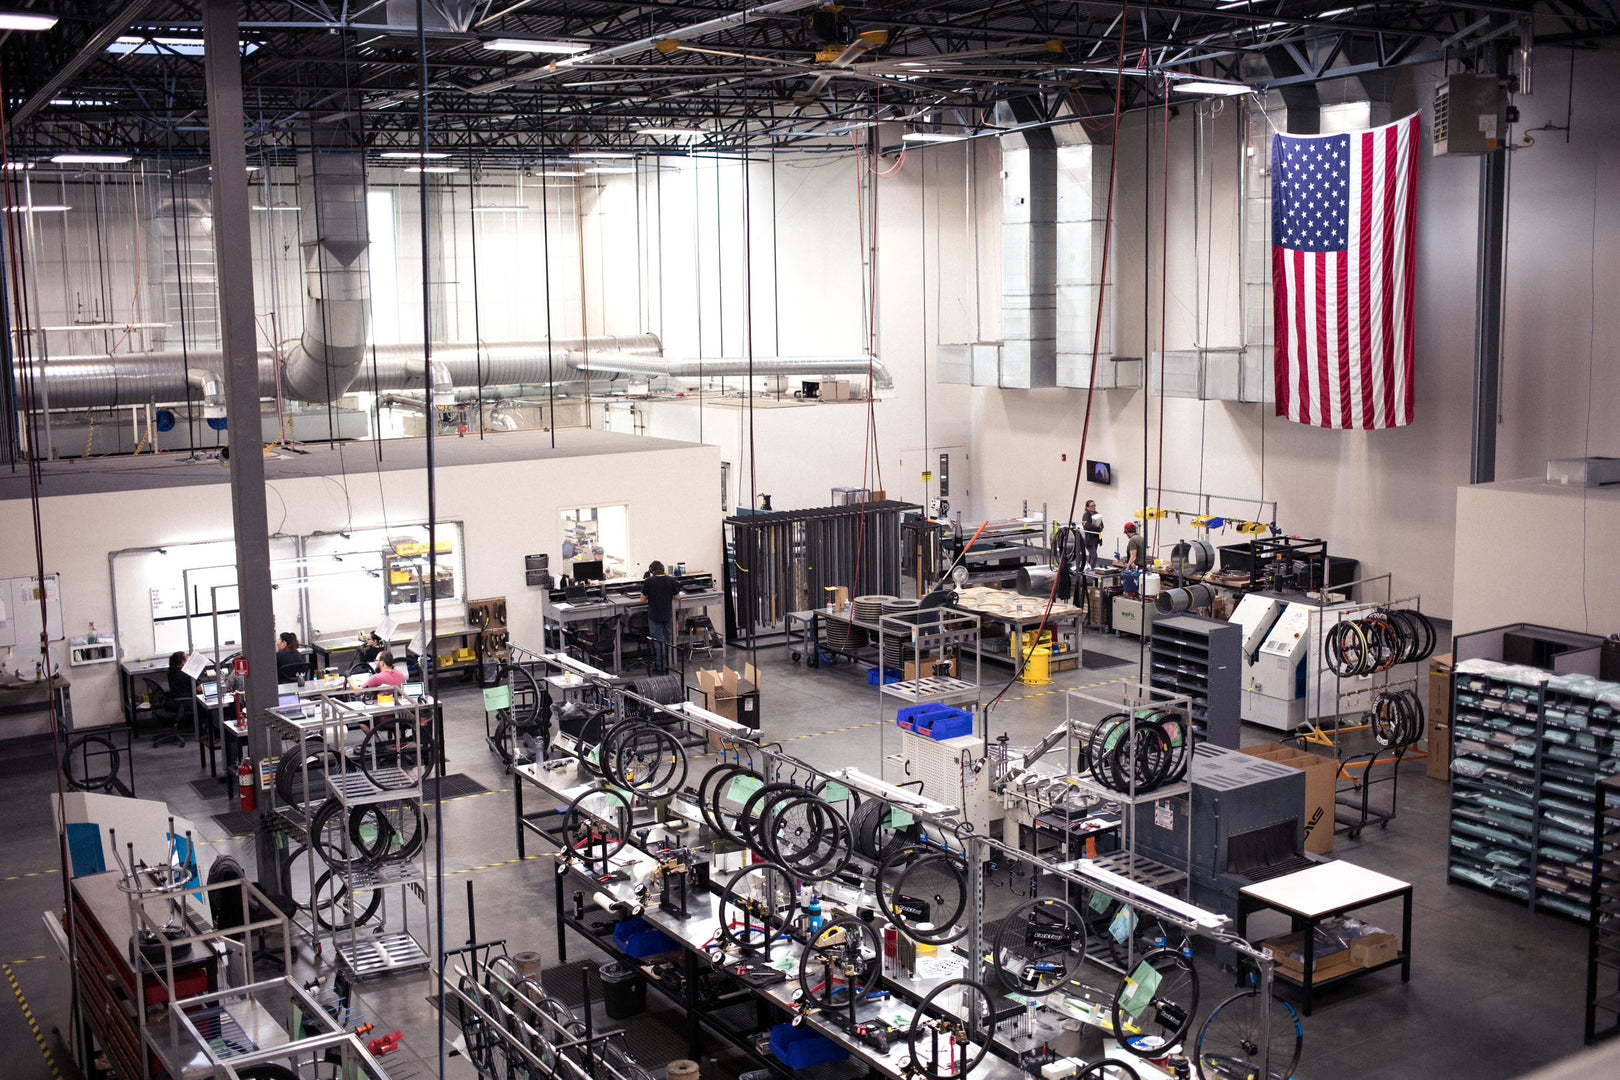 Premium Performance Built in the USA: A Look Inside Enve's HQ